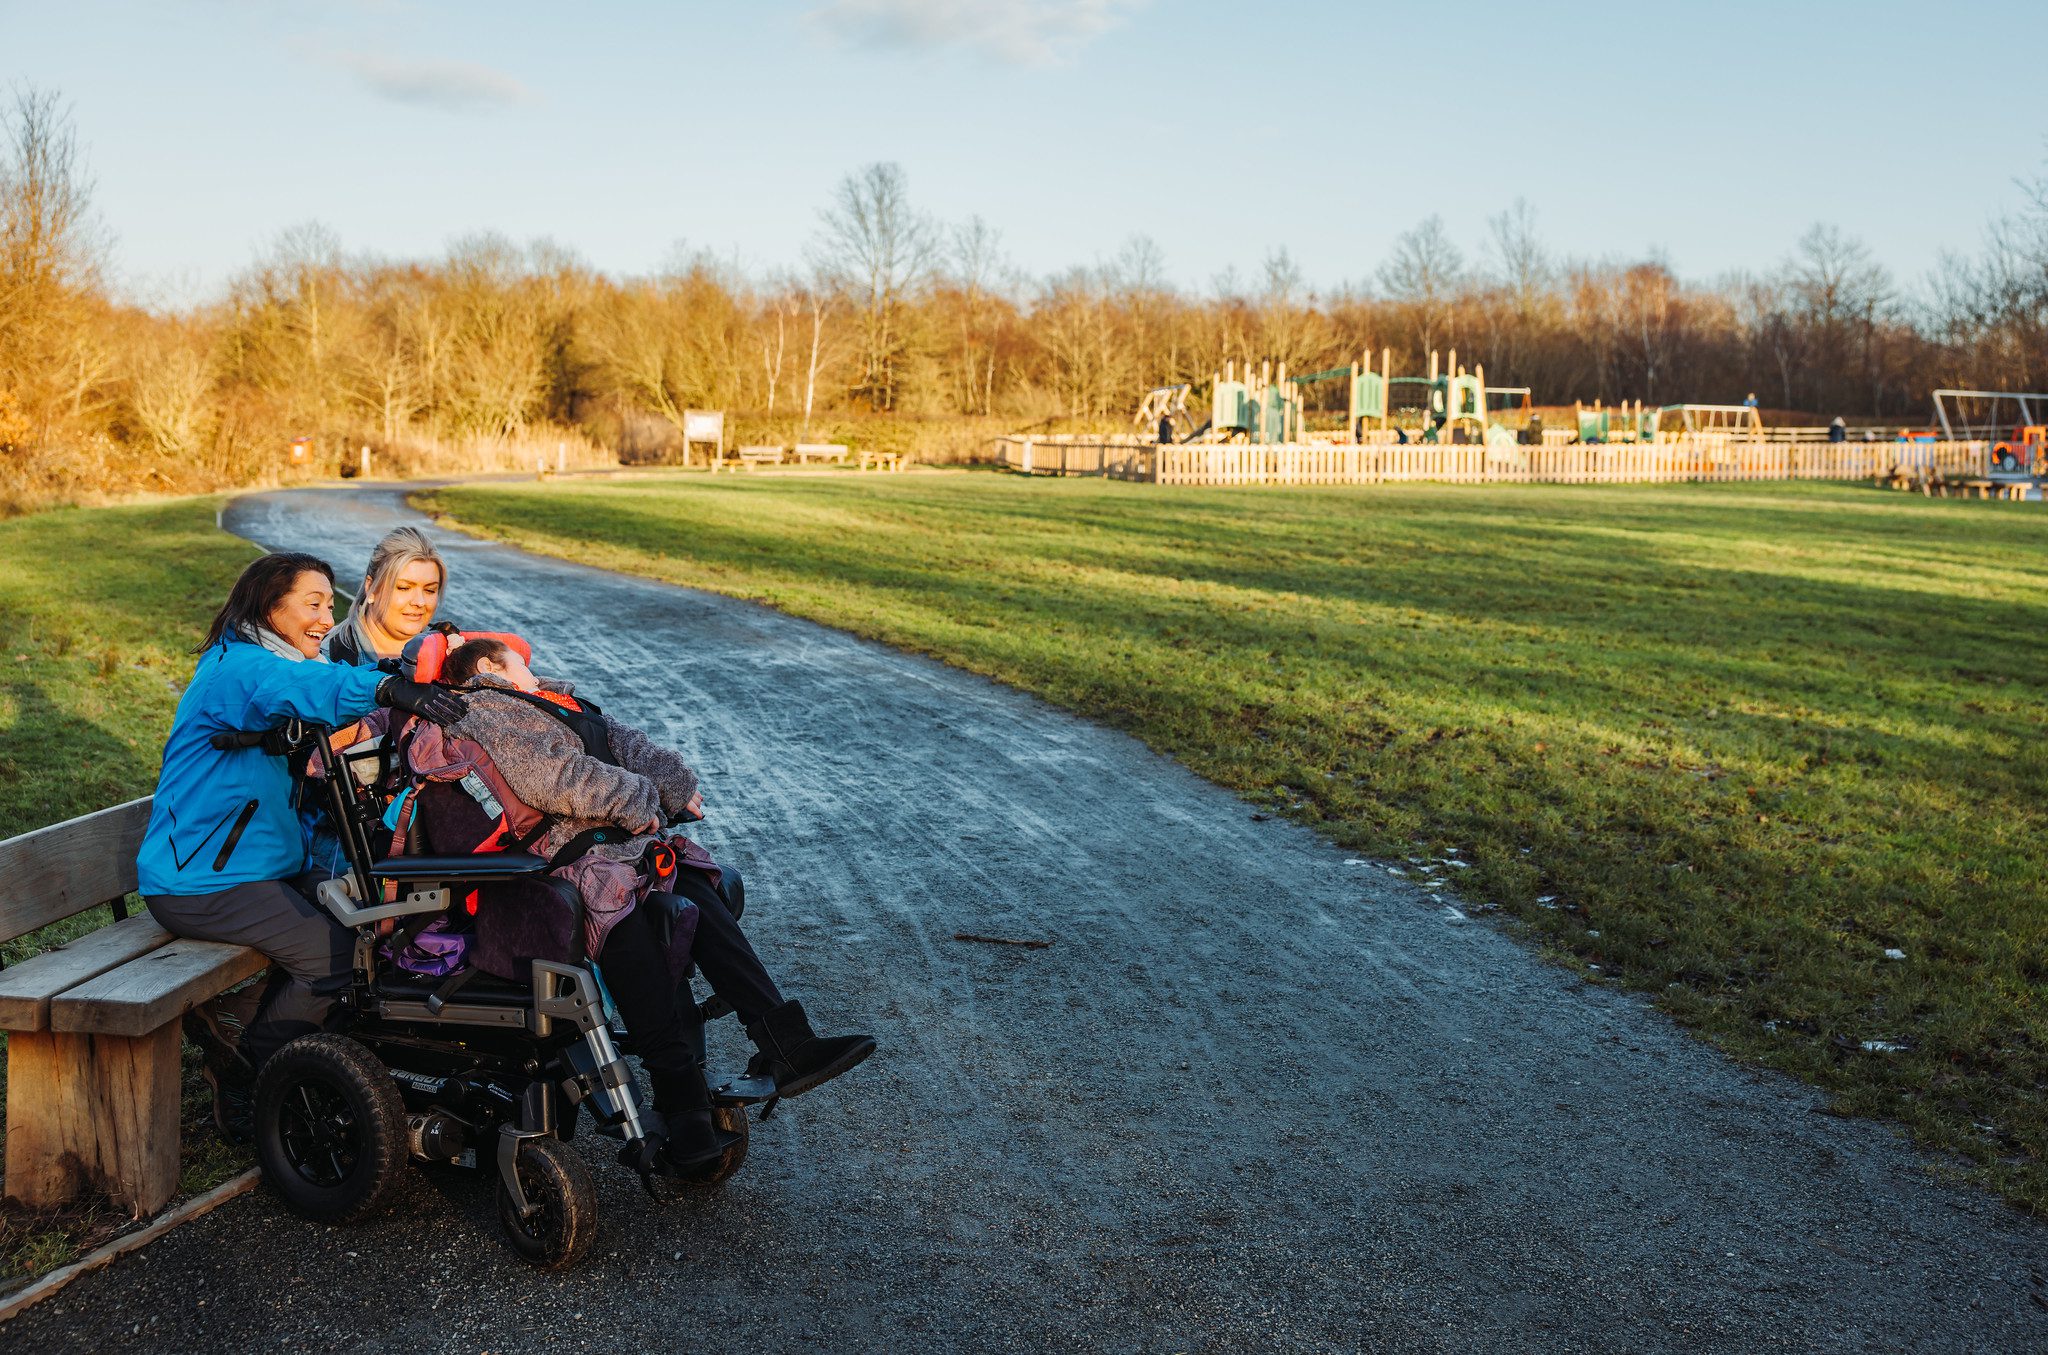 People of all abilities sitting in winter coats in front of distant play area